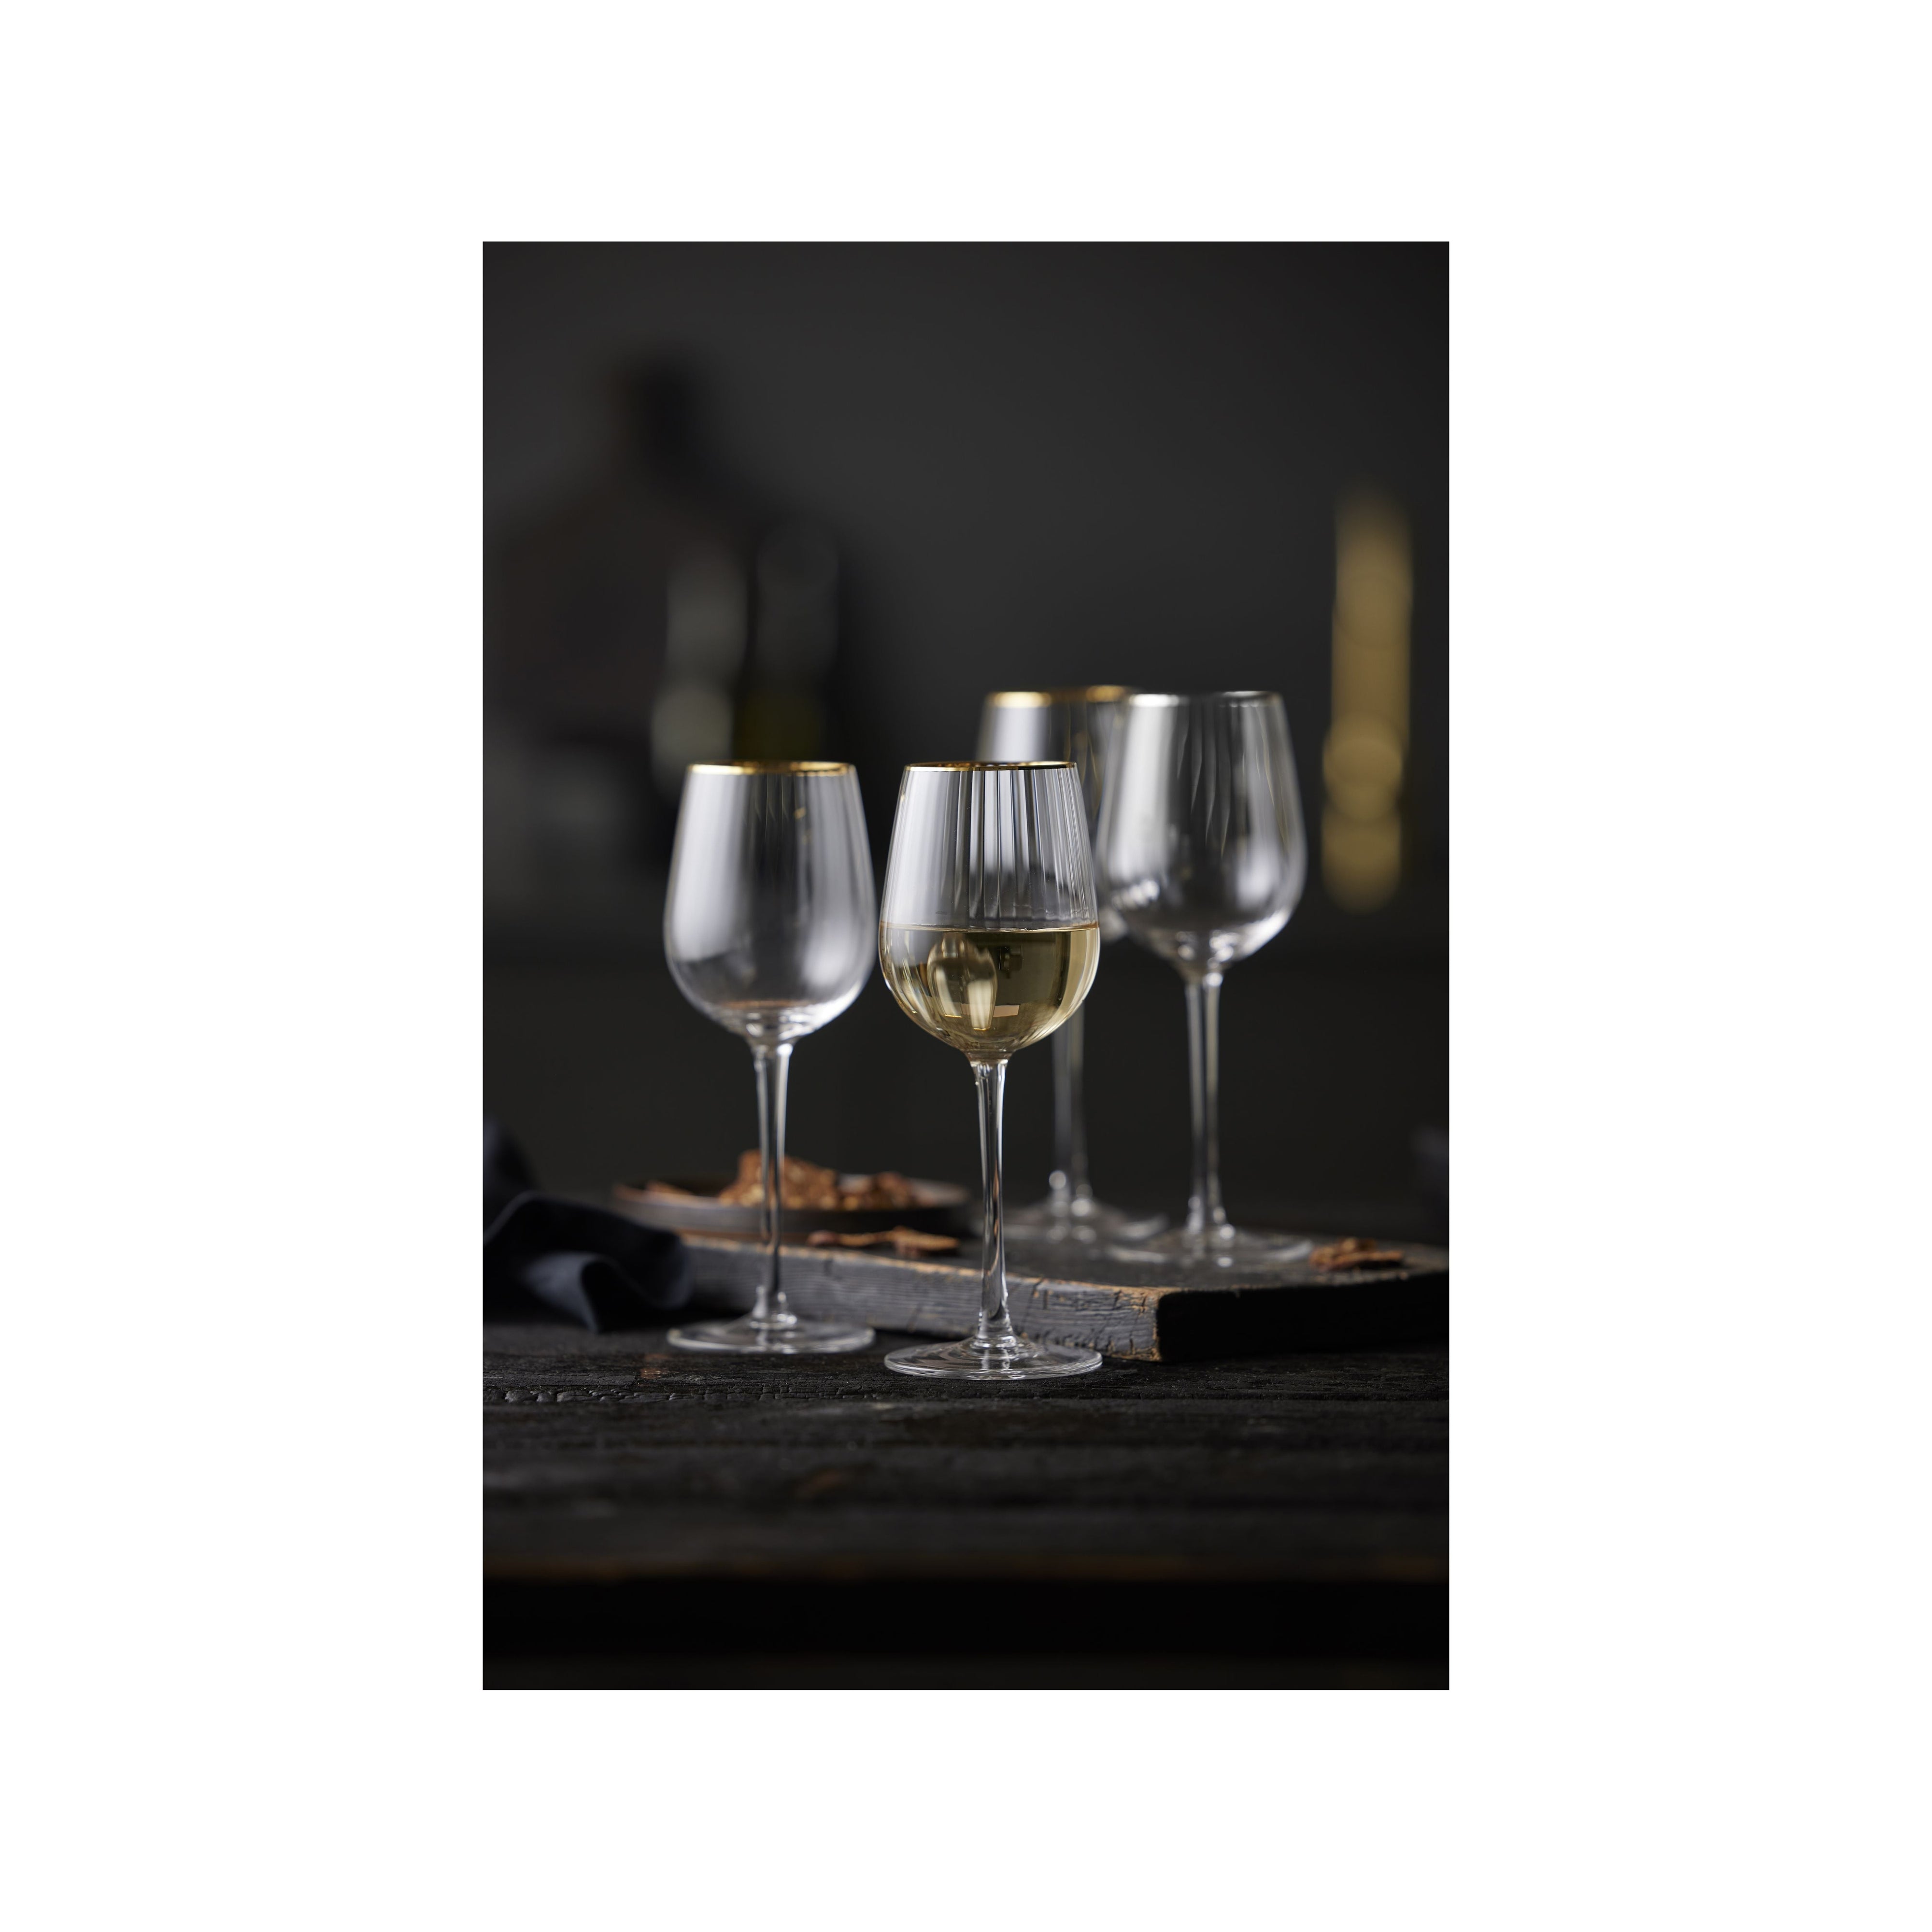 Lyngby Glas Palermo Gold Weißweinglas 30 Cl 4 St.